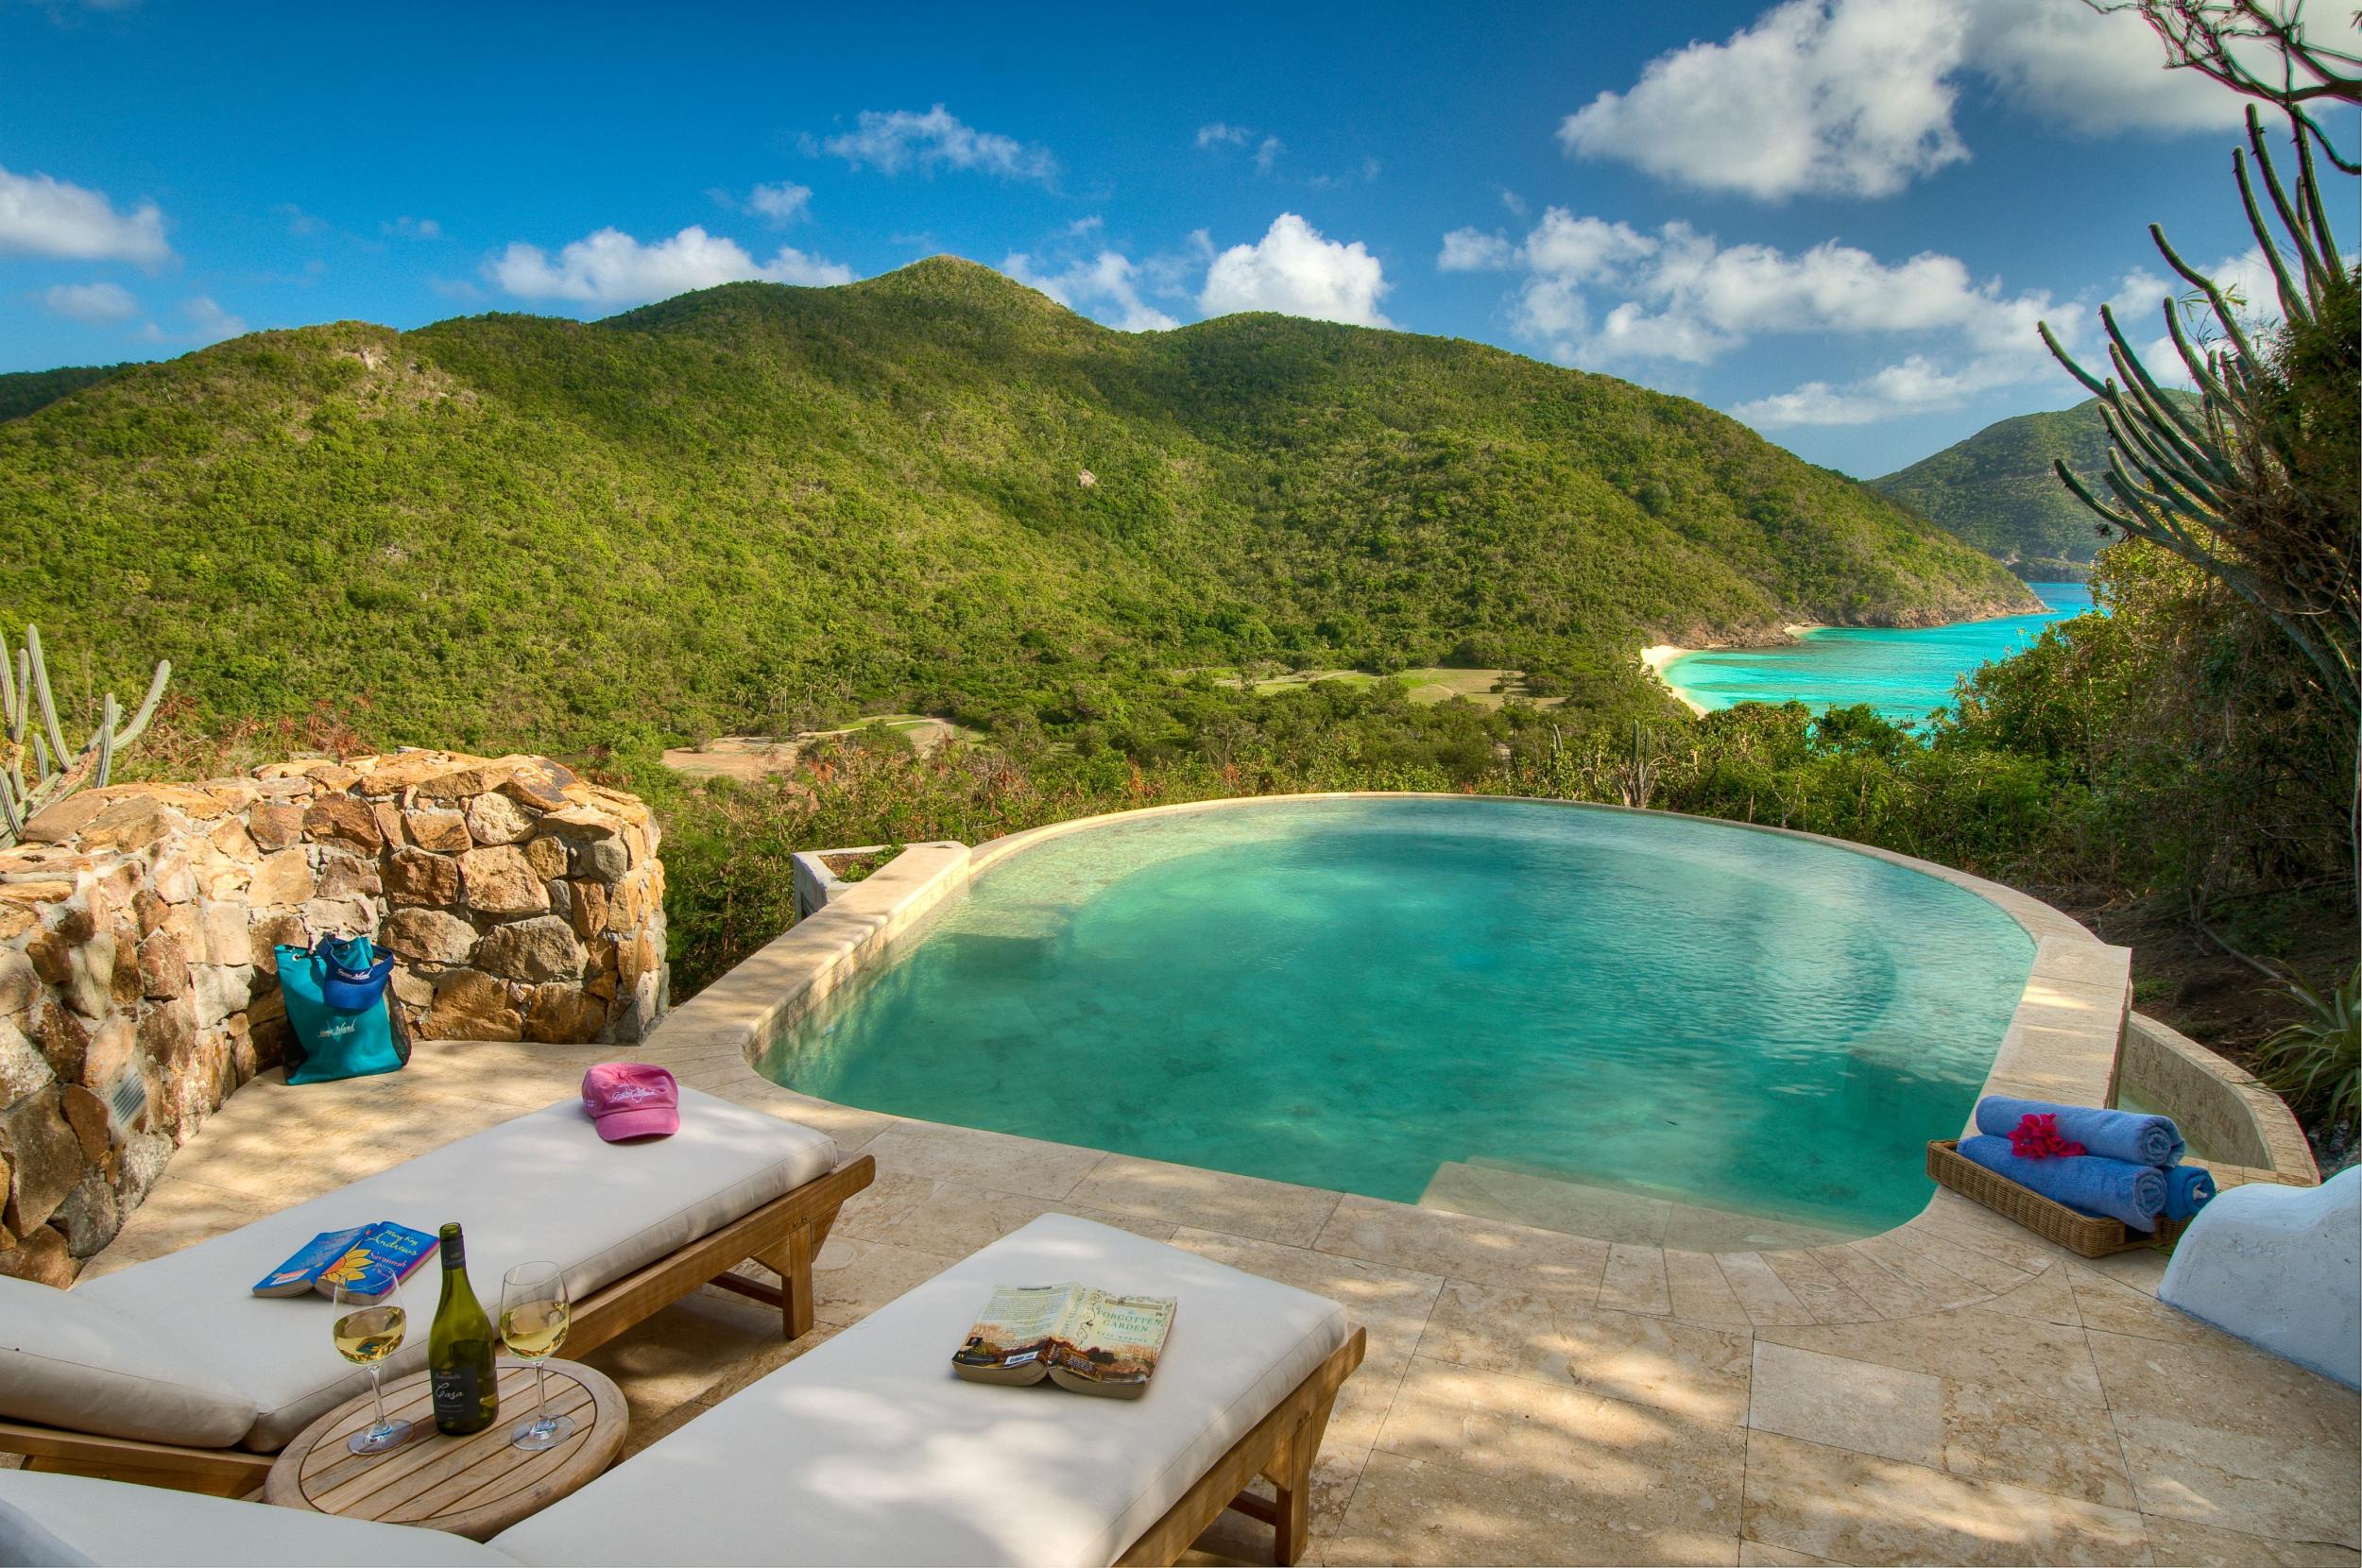 Villas have private infinity pools